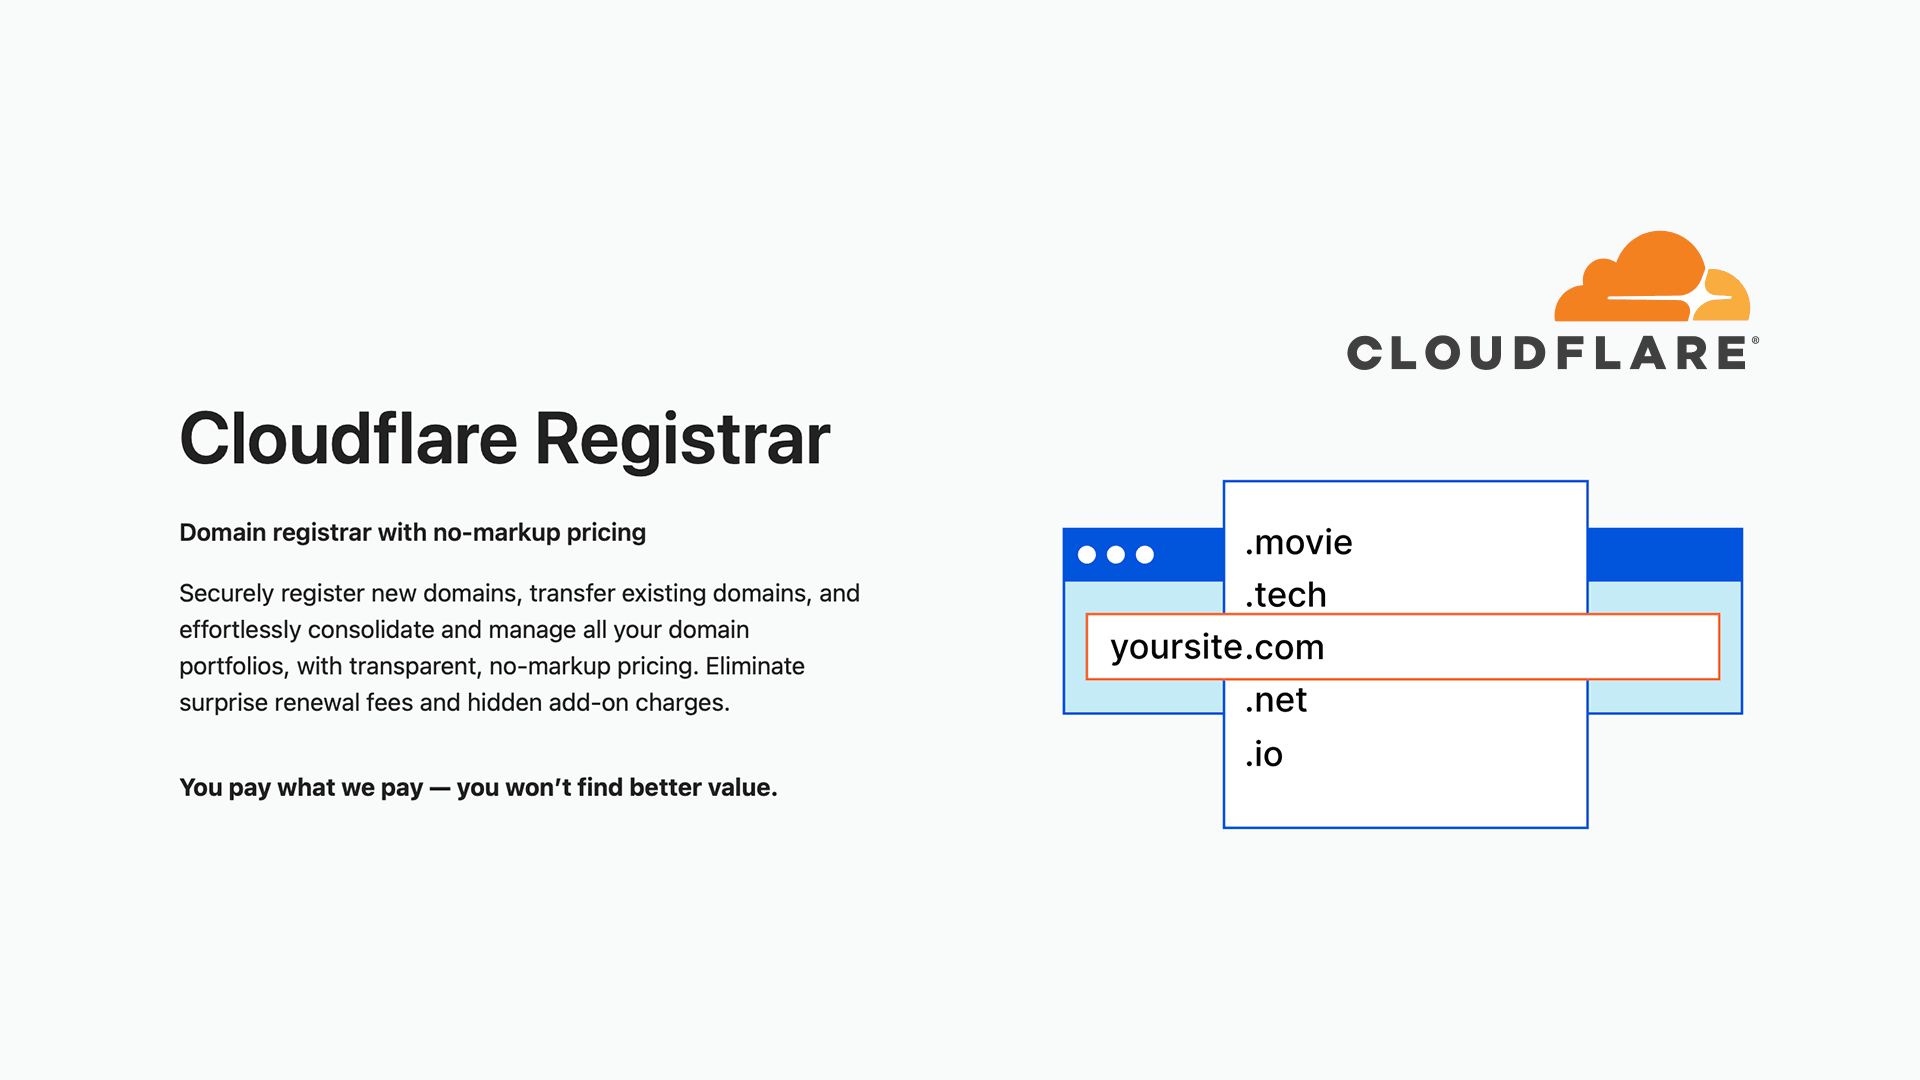 Namesco is raising domain prices, so it's time to move to Cloudflare and save!